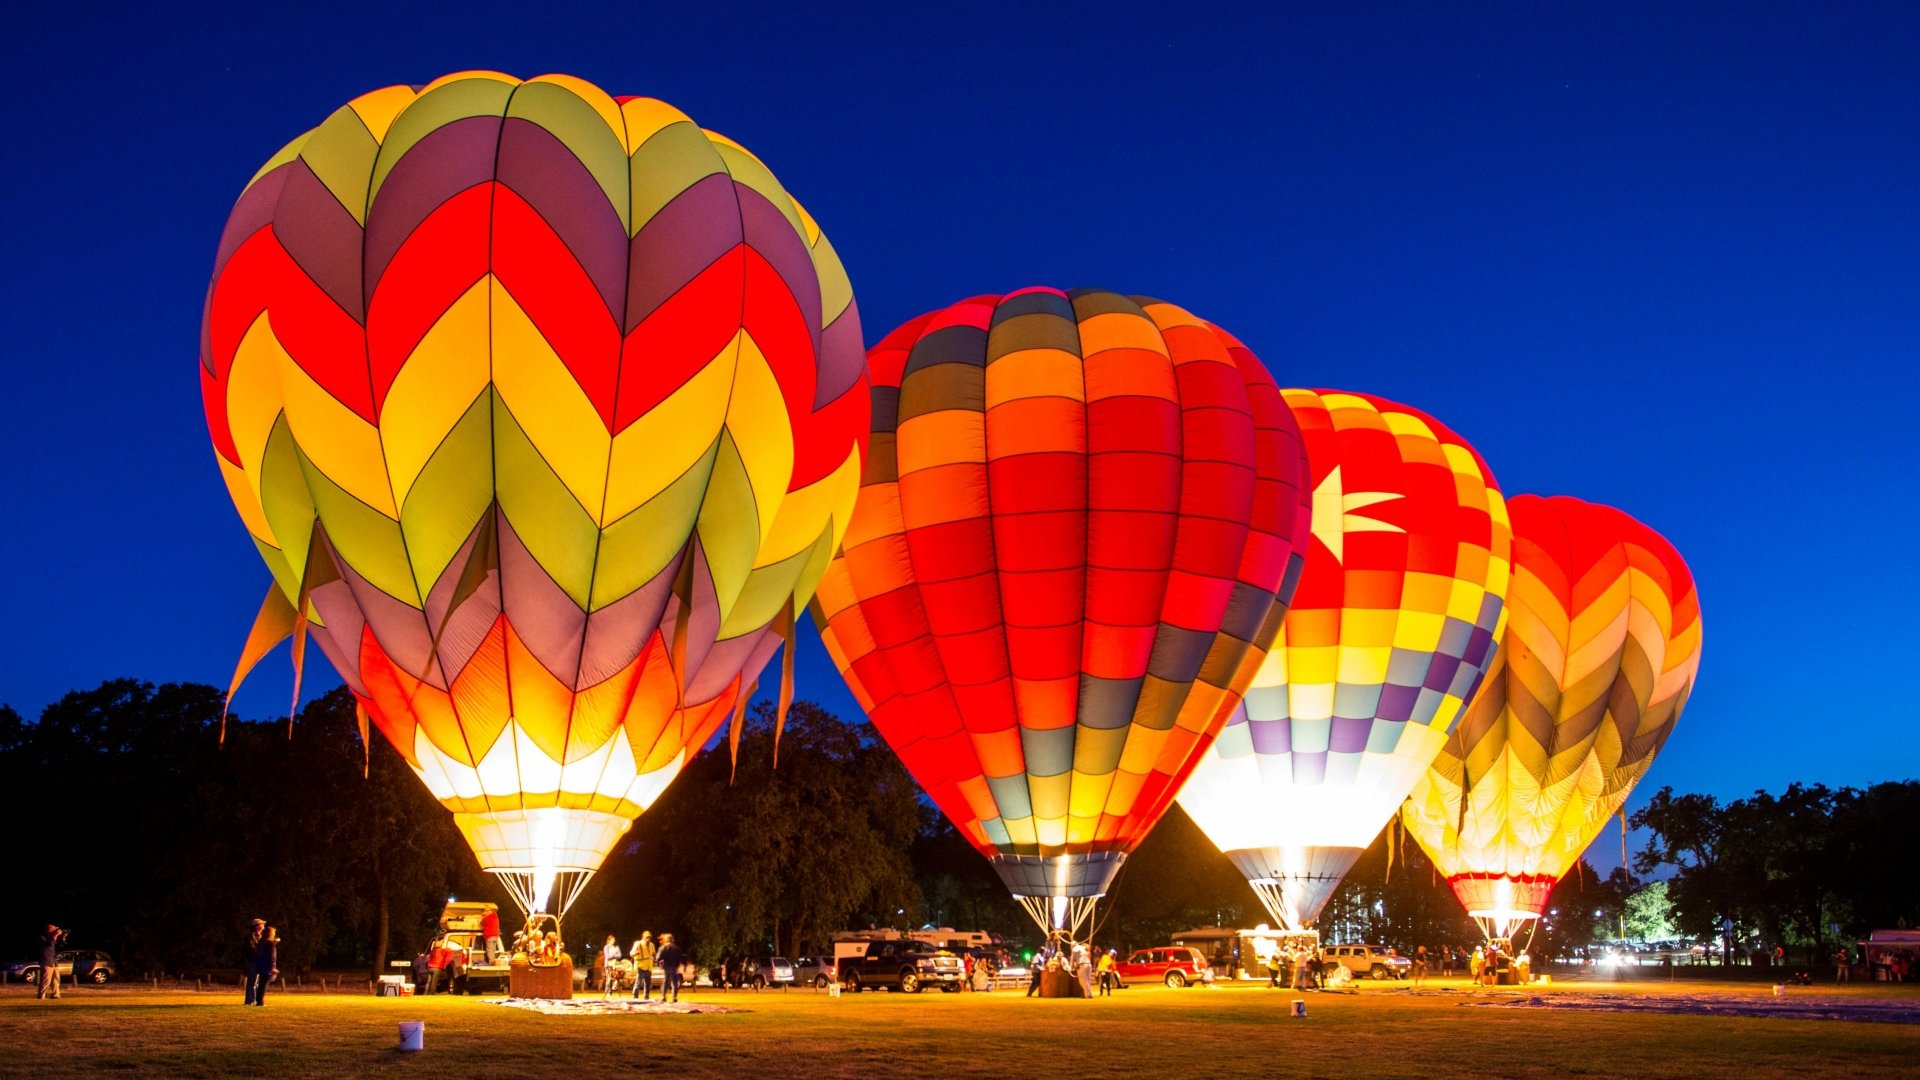 250+ Hot Air Balloon HD Wallpapers and Backgrounds